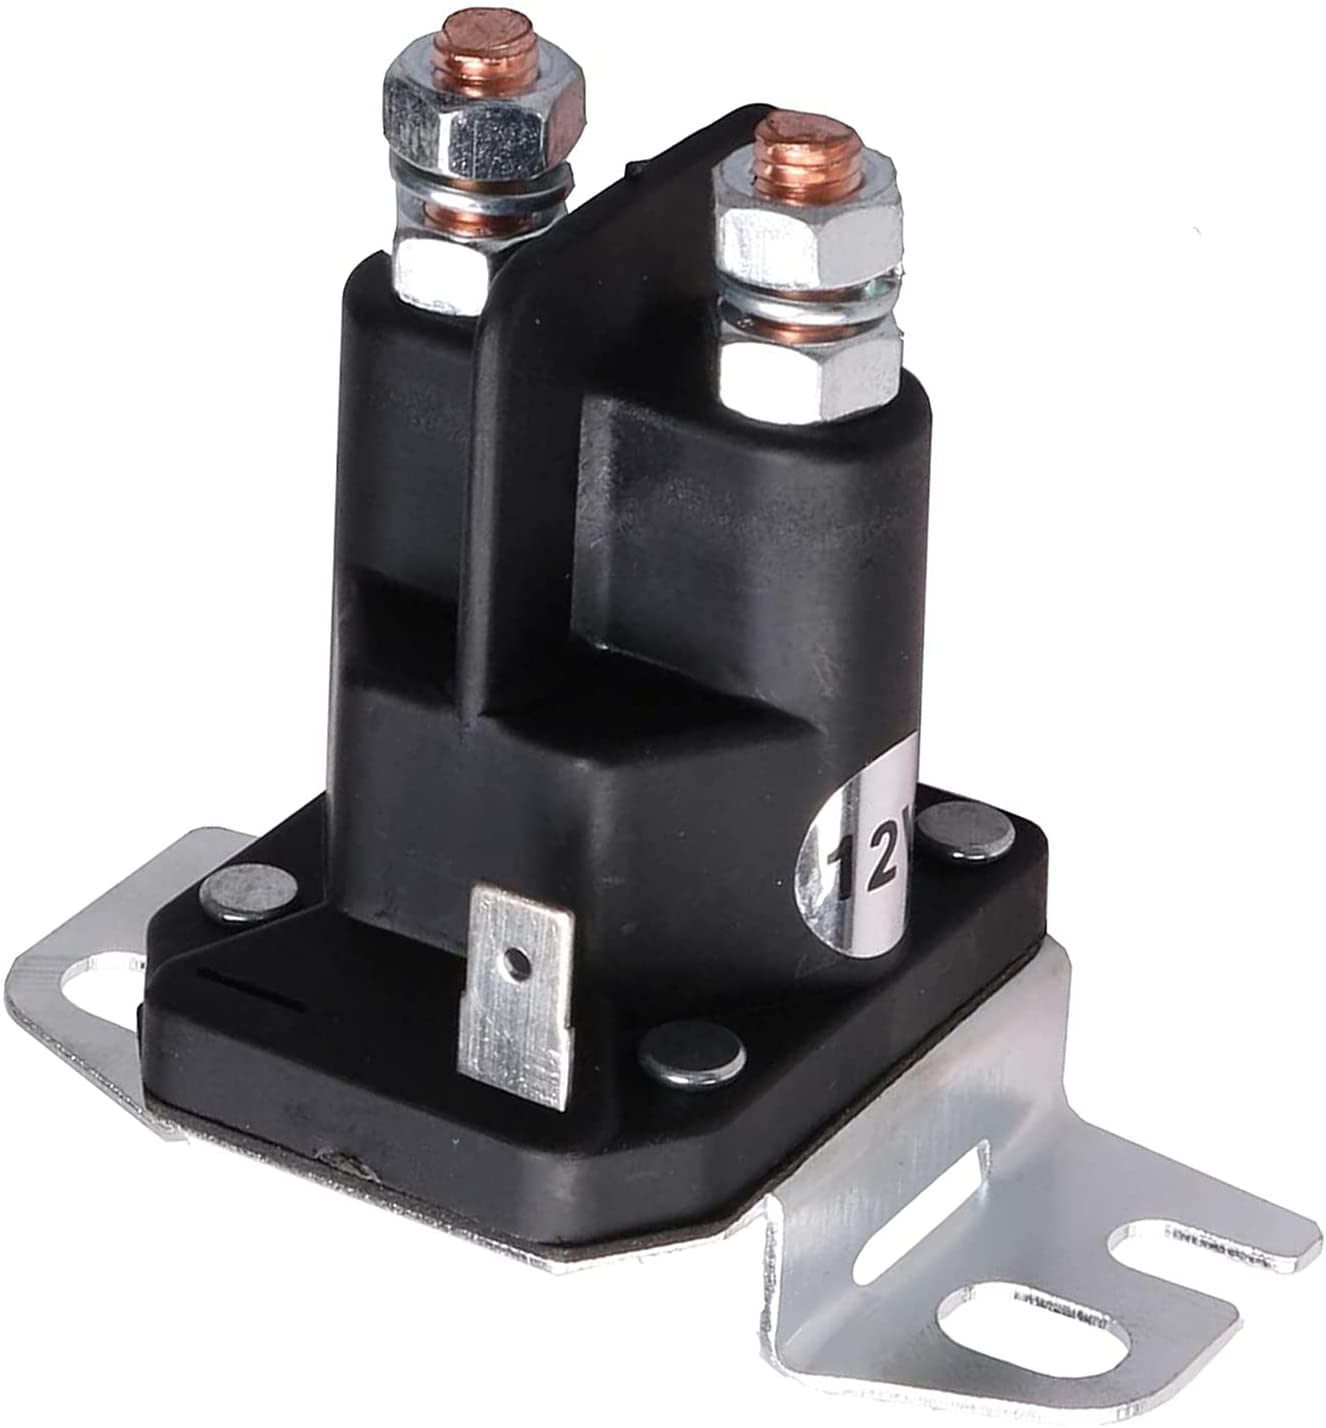 3-Terminals Starter Solenoid Relay Compatible with Briggs & Stratton 691656 846820 557067 807829 555375GS 745000 745000MA 745001 Trombetta 812-1201-211-05 93245-1 93245-2WR 12V 200/300A - KUDUPARTS